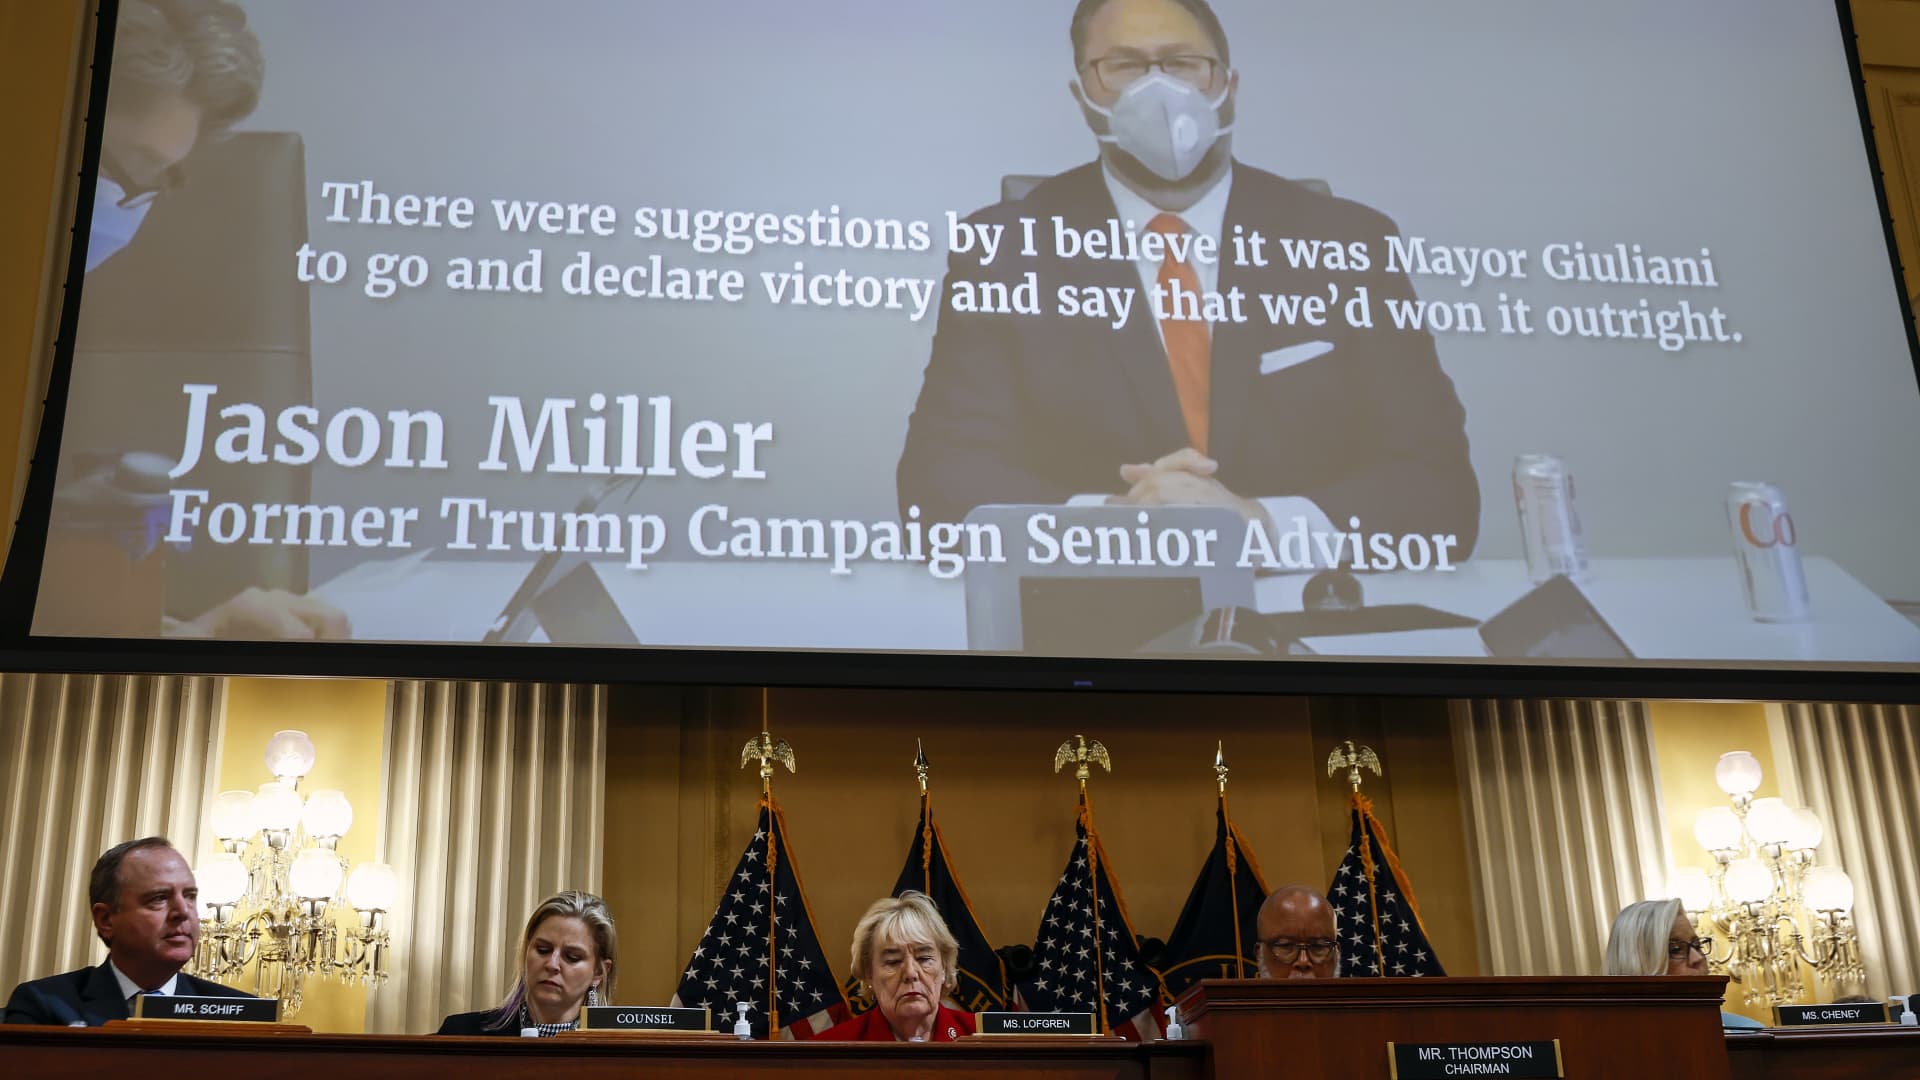 Video from an interview with Jason Miller, former President Trump Campaign Senior Advisor, is played during a hearing by the Select Committee to Investigate the January 6th Attack on the U.S. Capitol in the Cannon House Office Building on June 13, 2022 in Washington, DC.